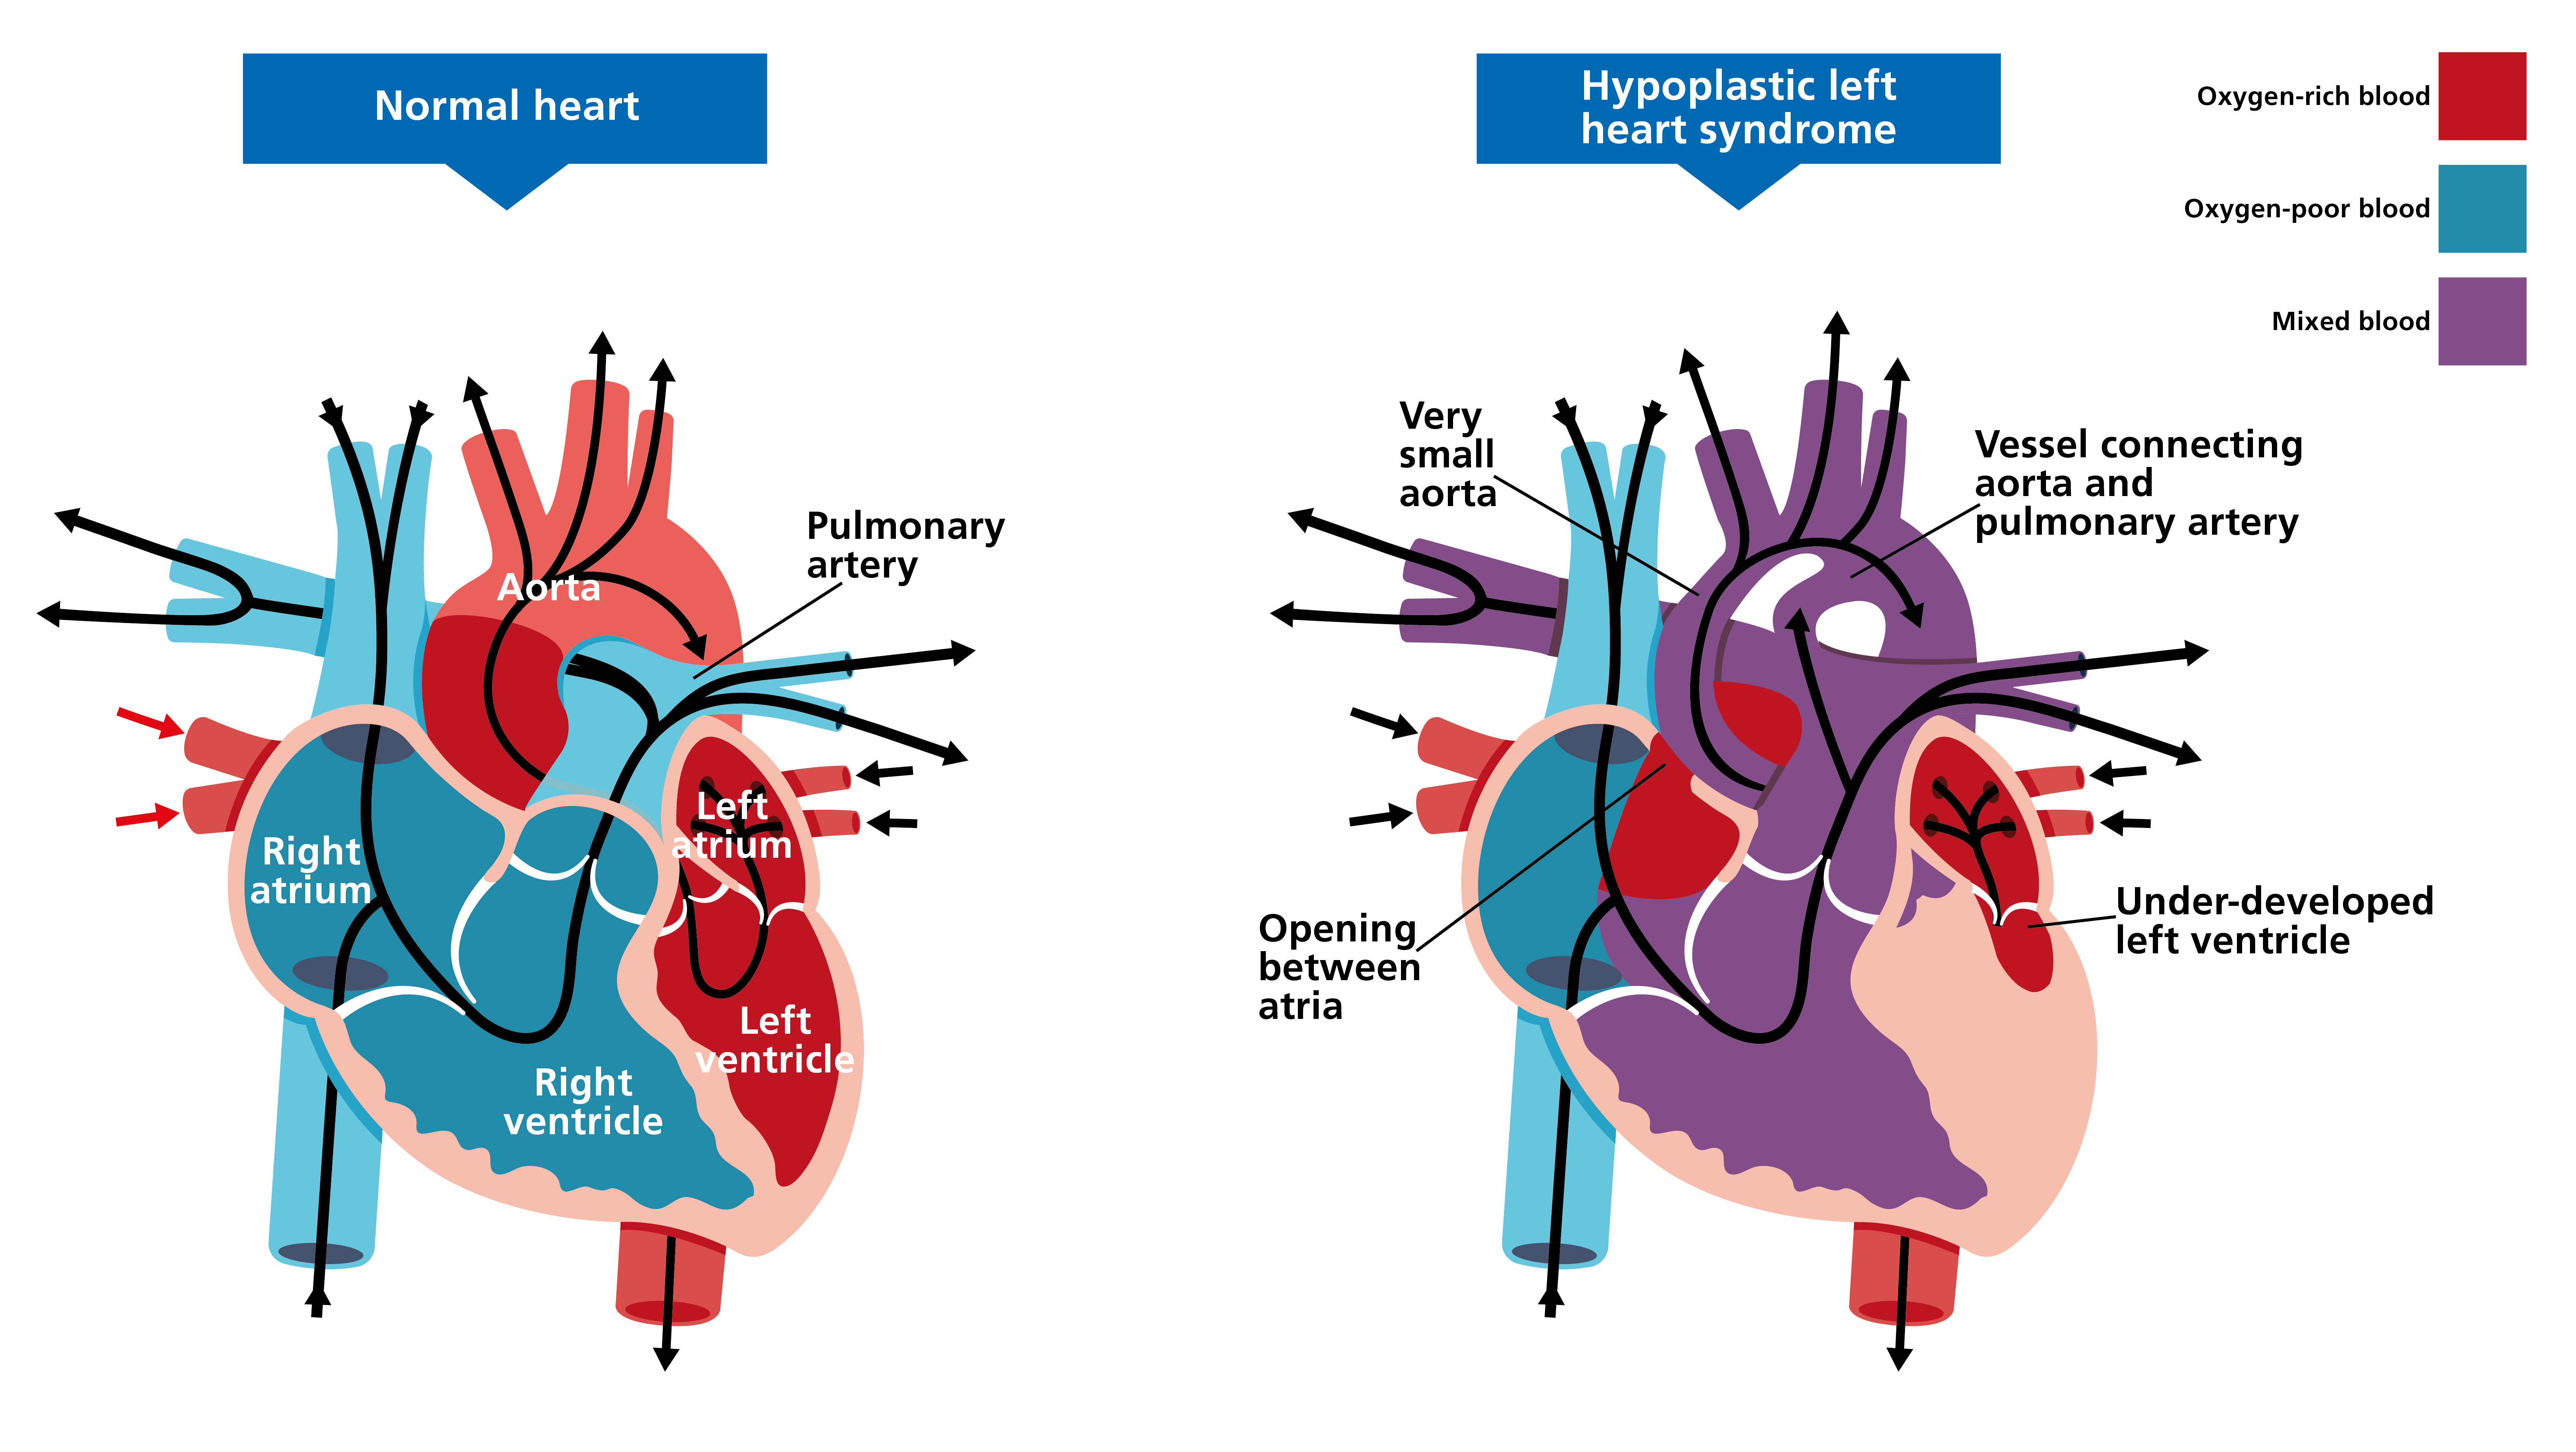 Two illustrated diagrams of hearts, side by side. The one on the left shows a normal heart; the one on the right shows a heart affected by hypoplastic left heart syndrome. Features of the affected heart include a very small aorta, an opening between atria, and an under-developed left ventricle. These features are labelled.